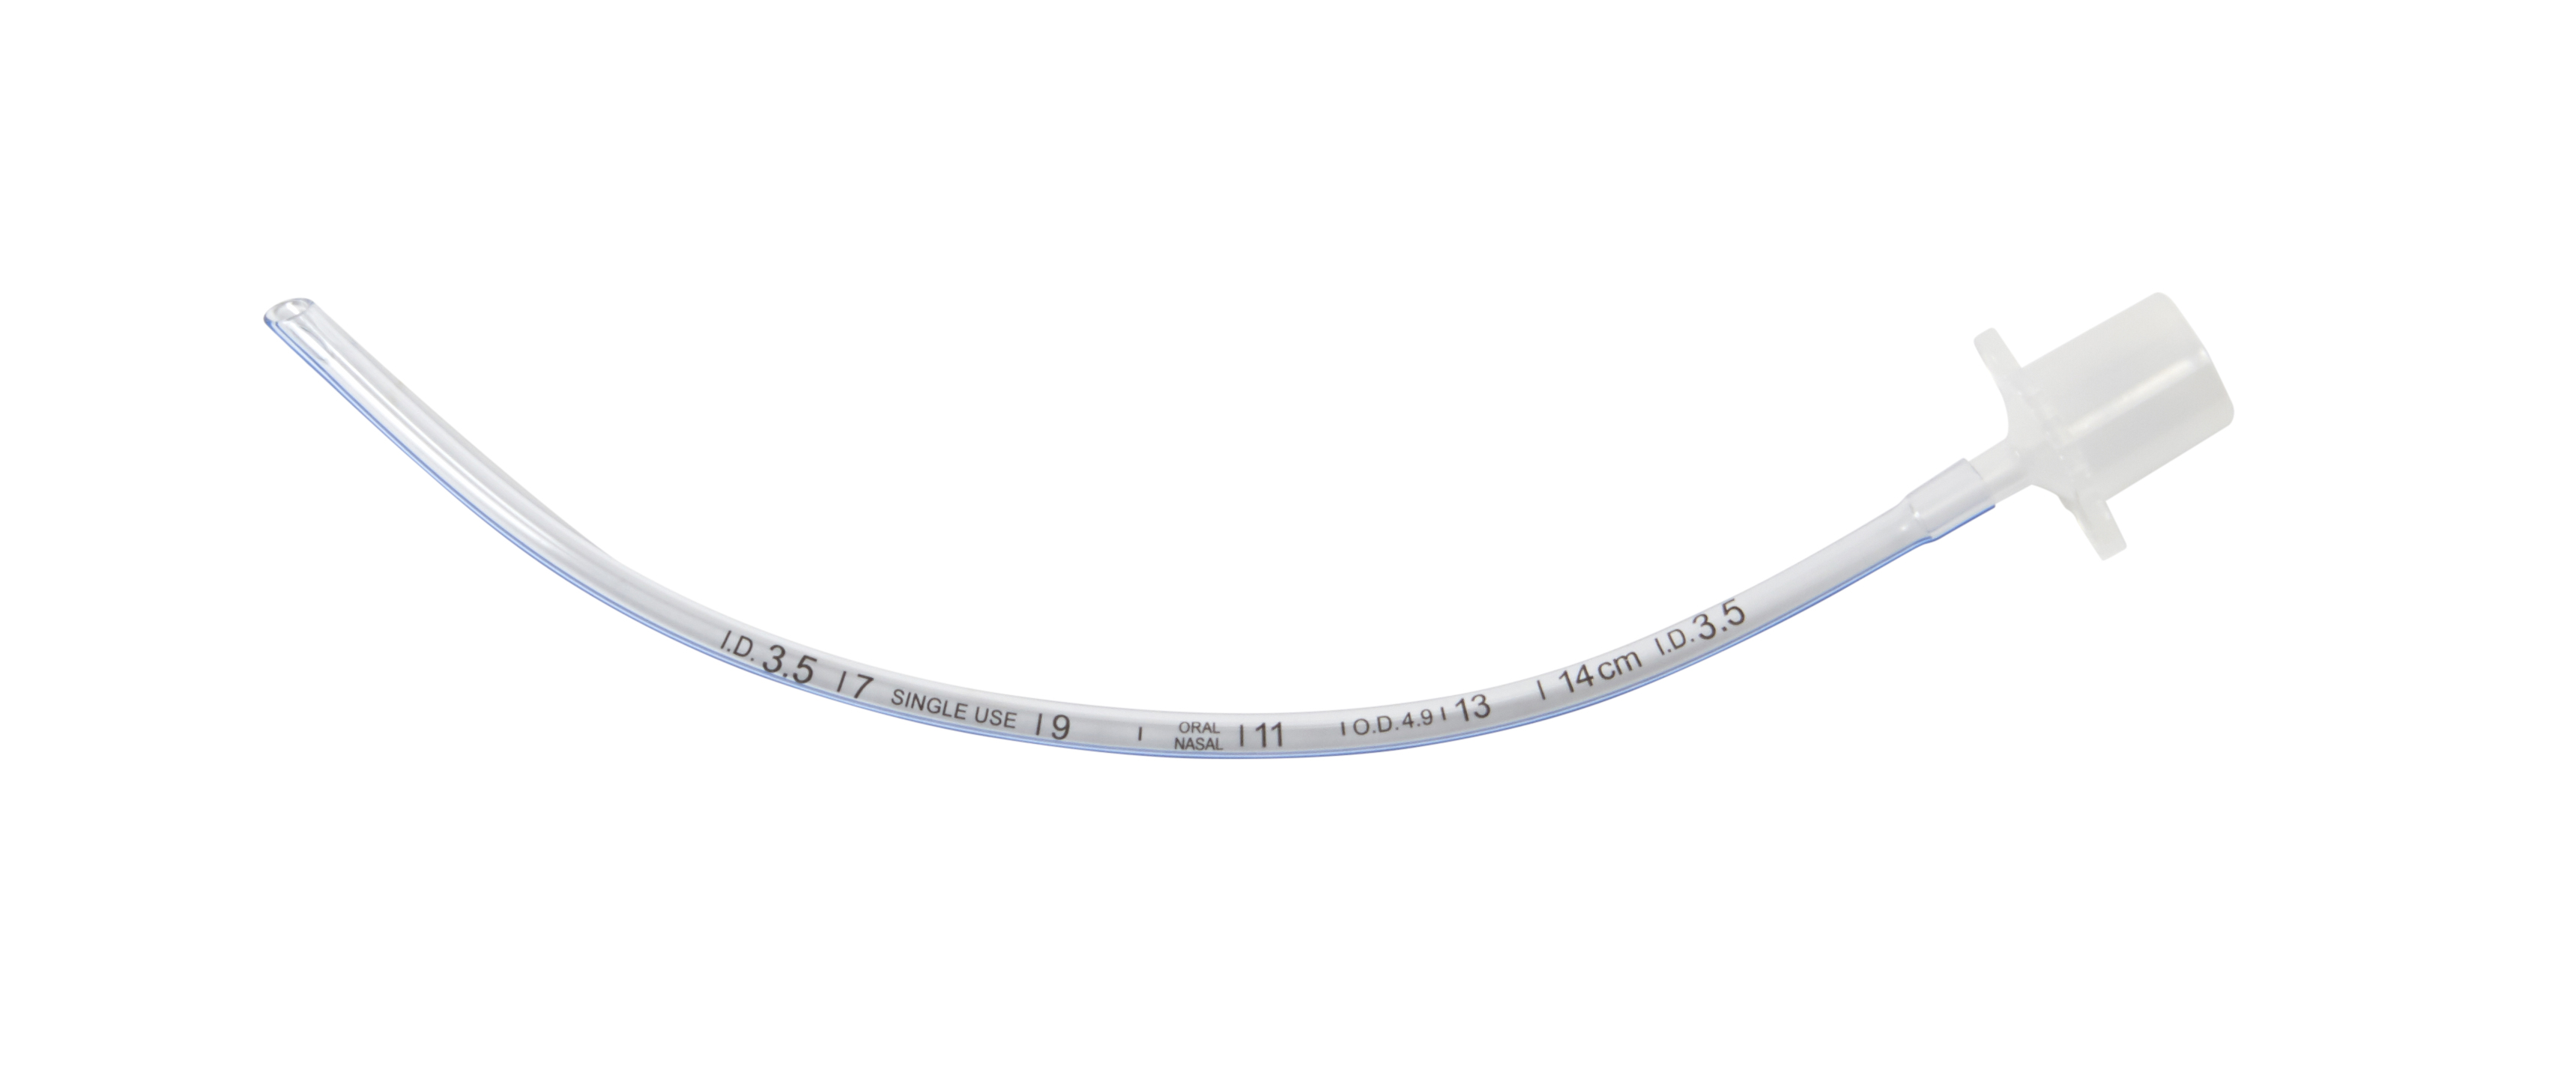 KRUUSE PVC Endotracheal Tubus, without cuff, ID 3.5 mm, OD 4.9 mm, 15 Fr x 18.5 cm (7.3''), 10/pk